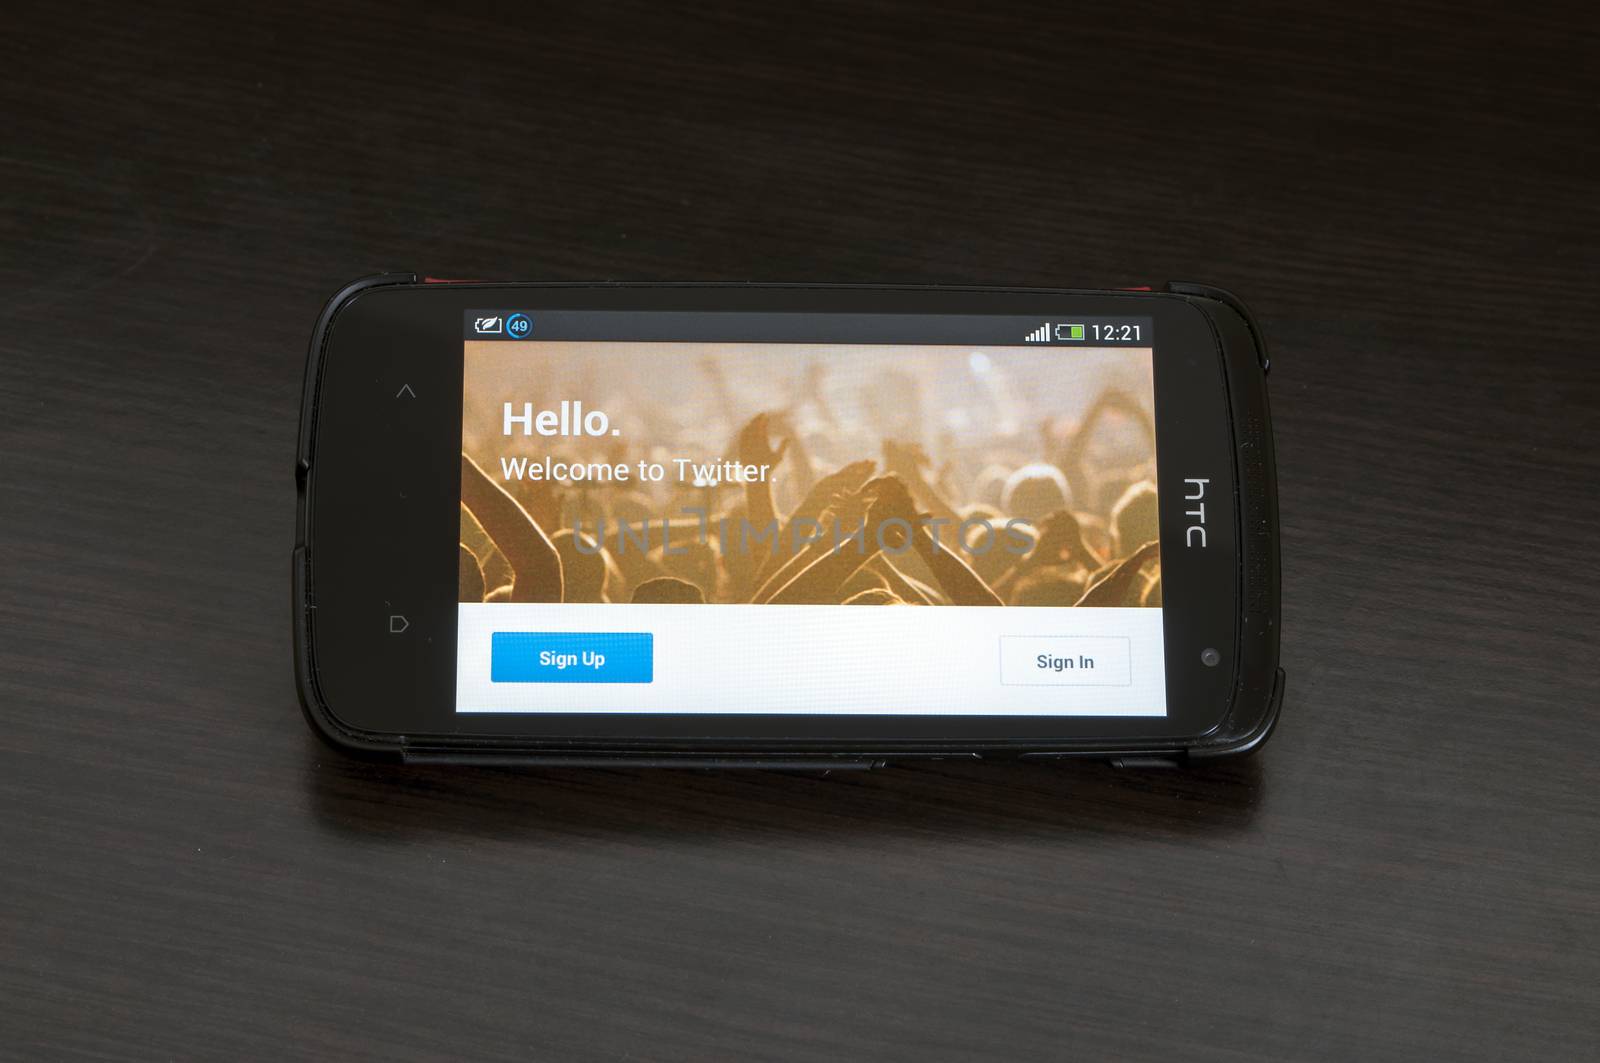 Bucharest, Romania -January 28, 2014: Photo of a HTC Desire device, showing the Twitter.com homepage of the Android app featuring the image of a crowd of hands with the message "Hello. Welcome to Twitter".